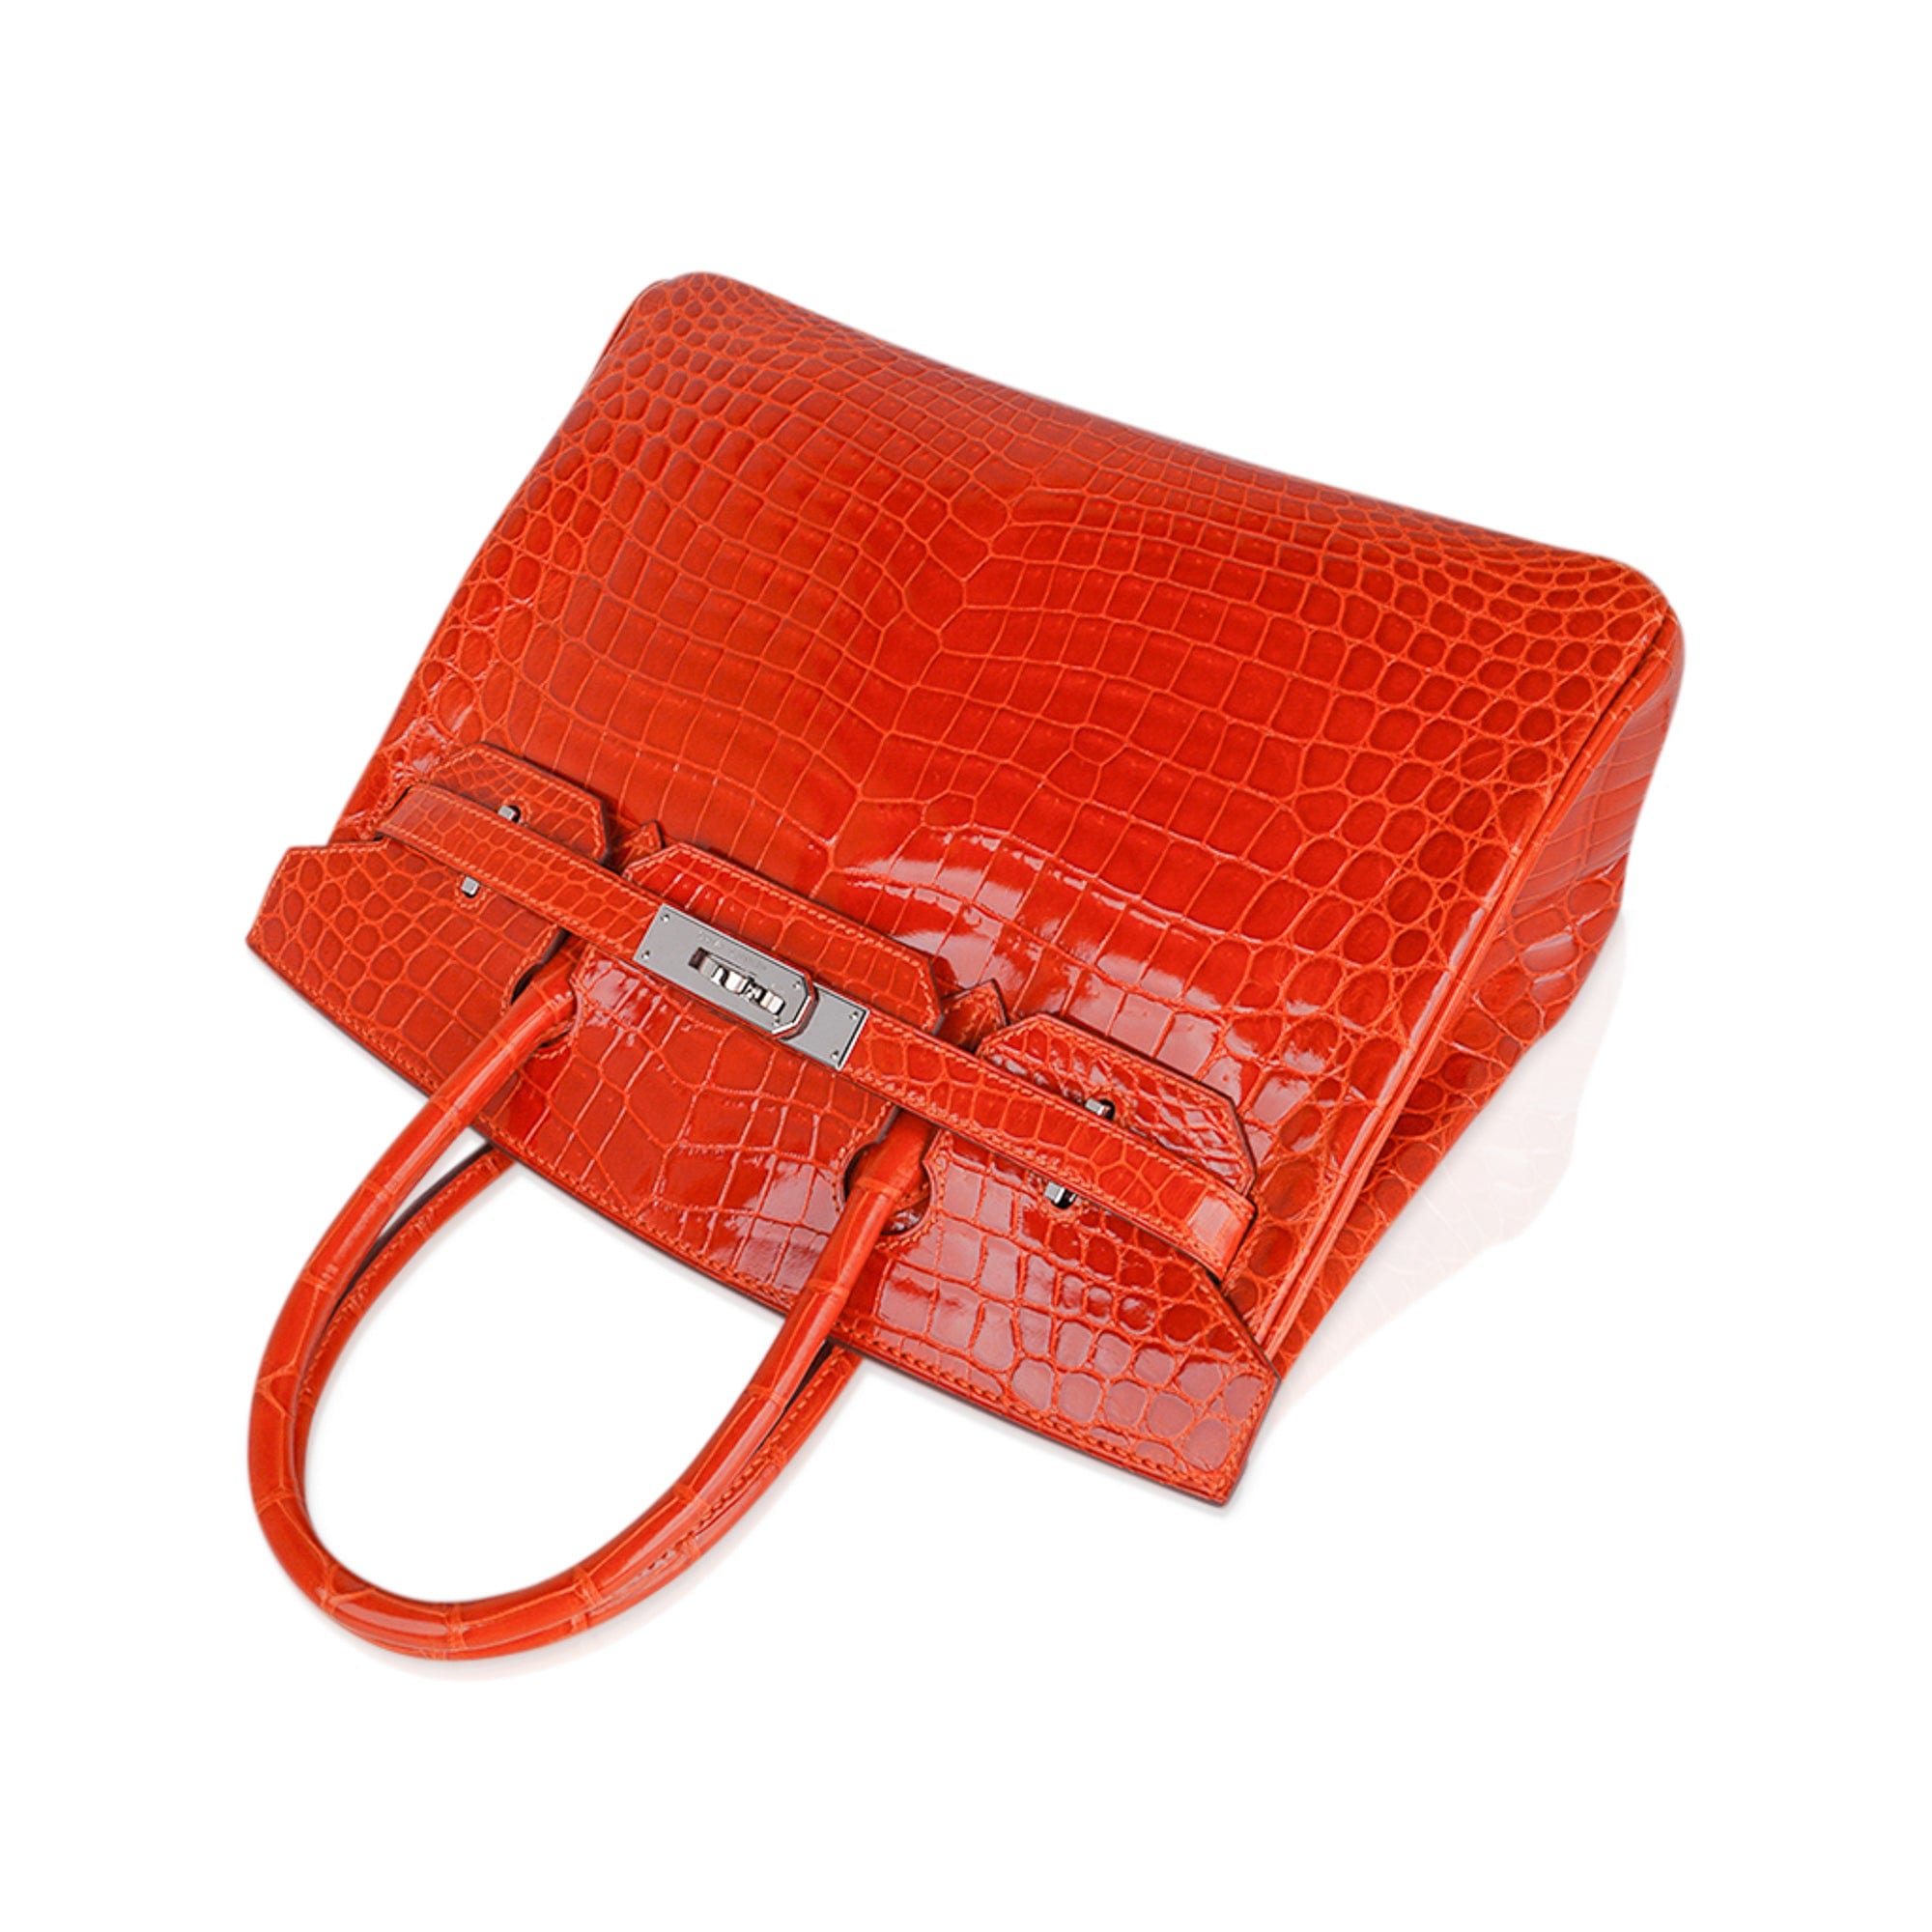 Hermes exotic skin handbags from the Bags of Luxury collection